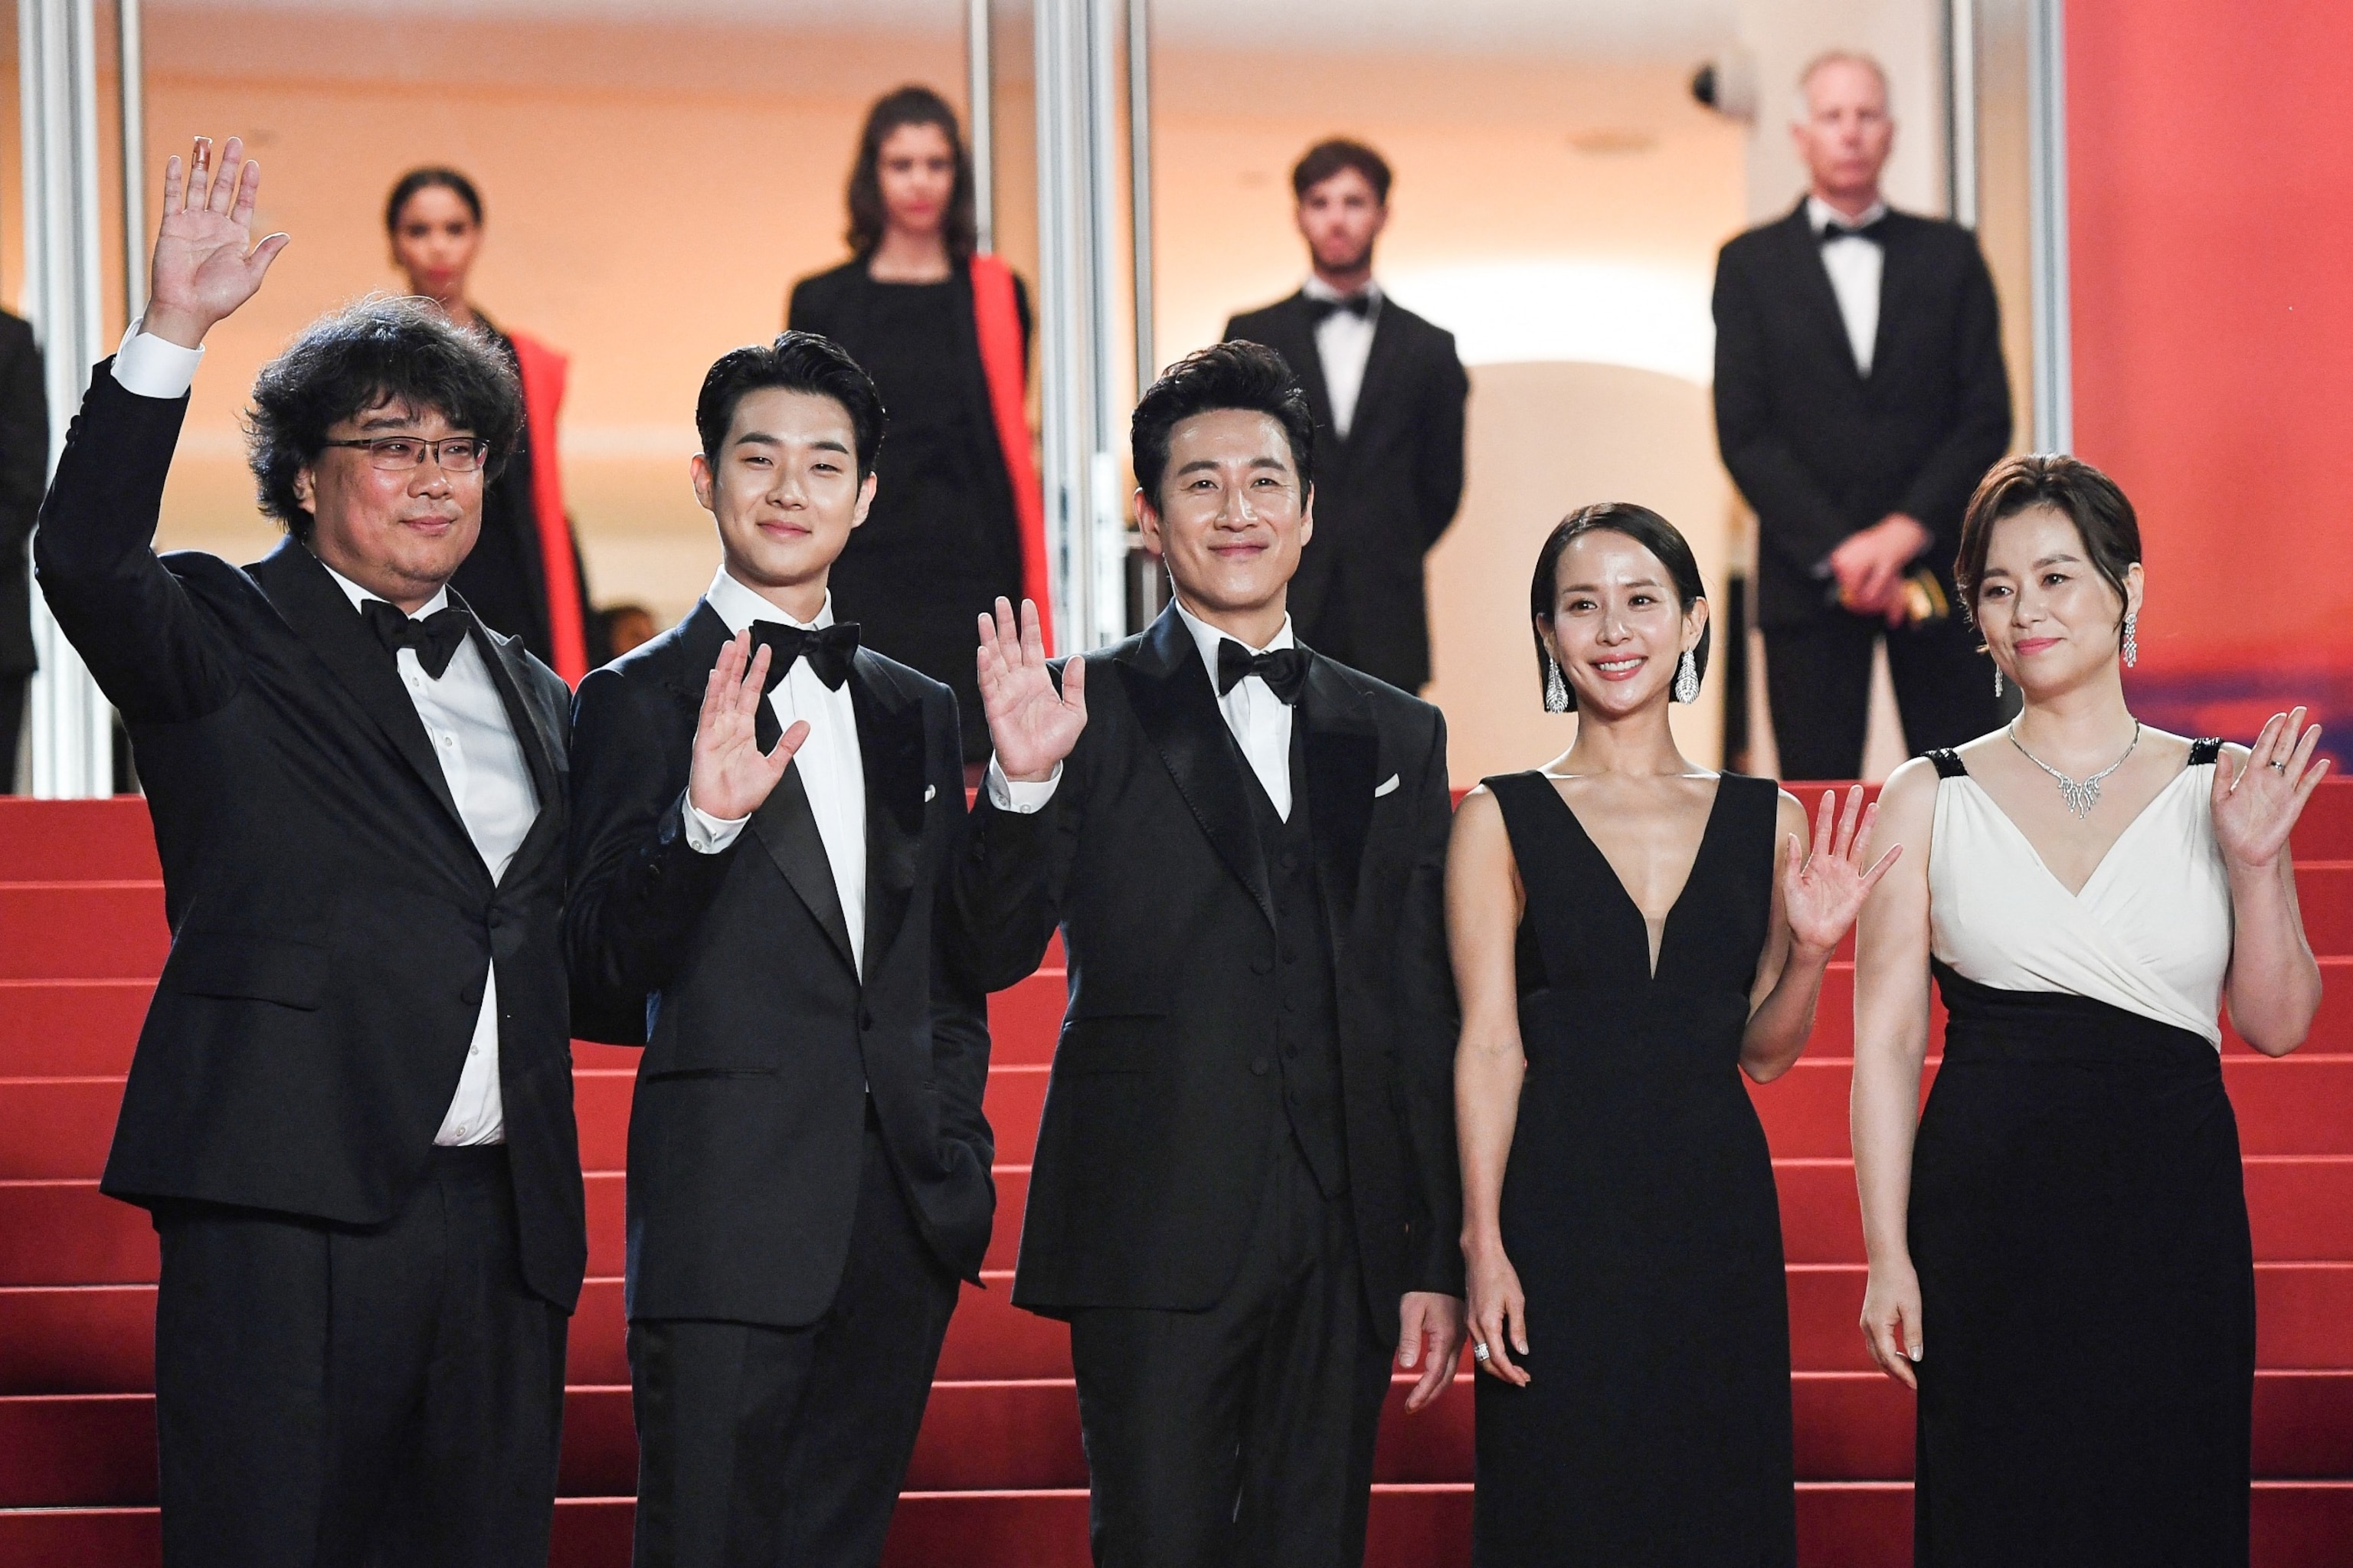 South Korean director Bong Joon-Ho, actor Choi Woo-shik, actor Lee Sun-kyun, actress Cho Yeo-jeong and actress Chang Hyae-jin arrive for the screening of the film "Parasite" at the Cannes Film Festival in Cannes, southern France, on May 21, 2019